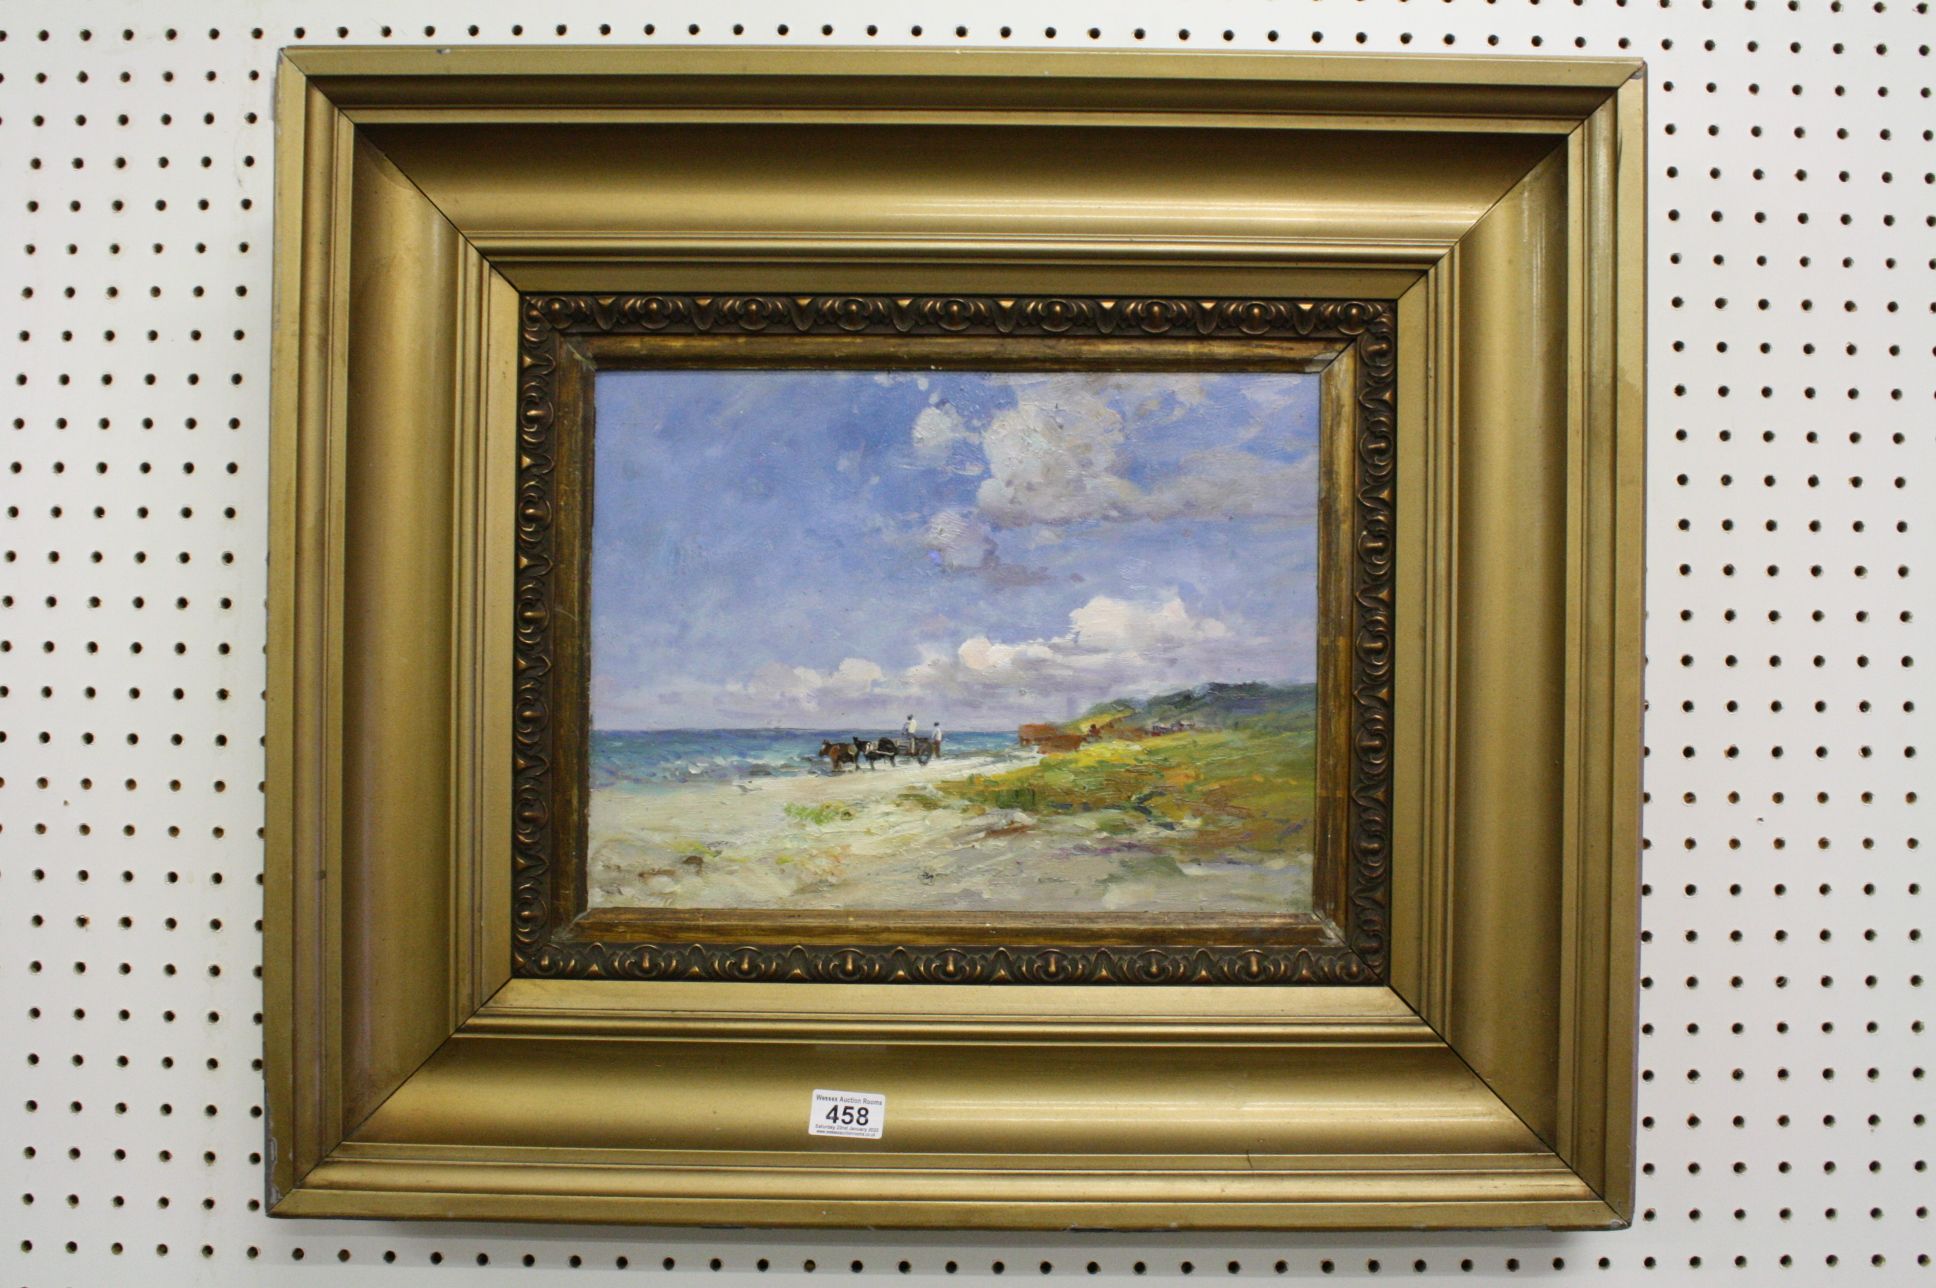 Oils on board, an extensive beach scene with seaweed gatherers, horses & cart on shoreline